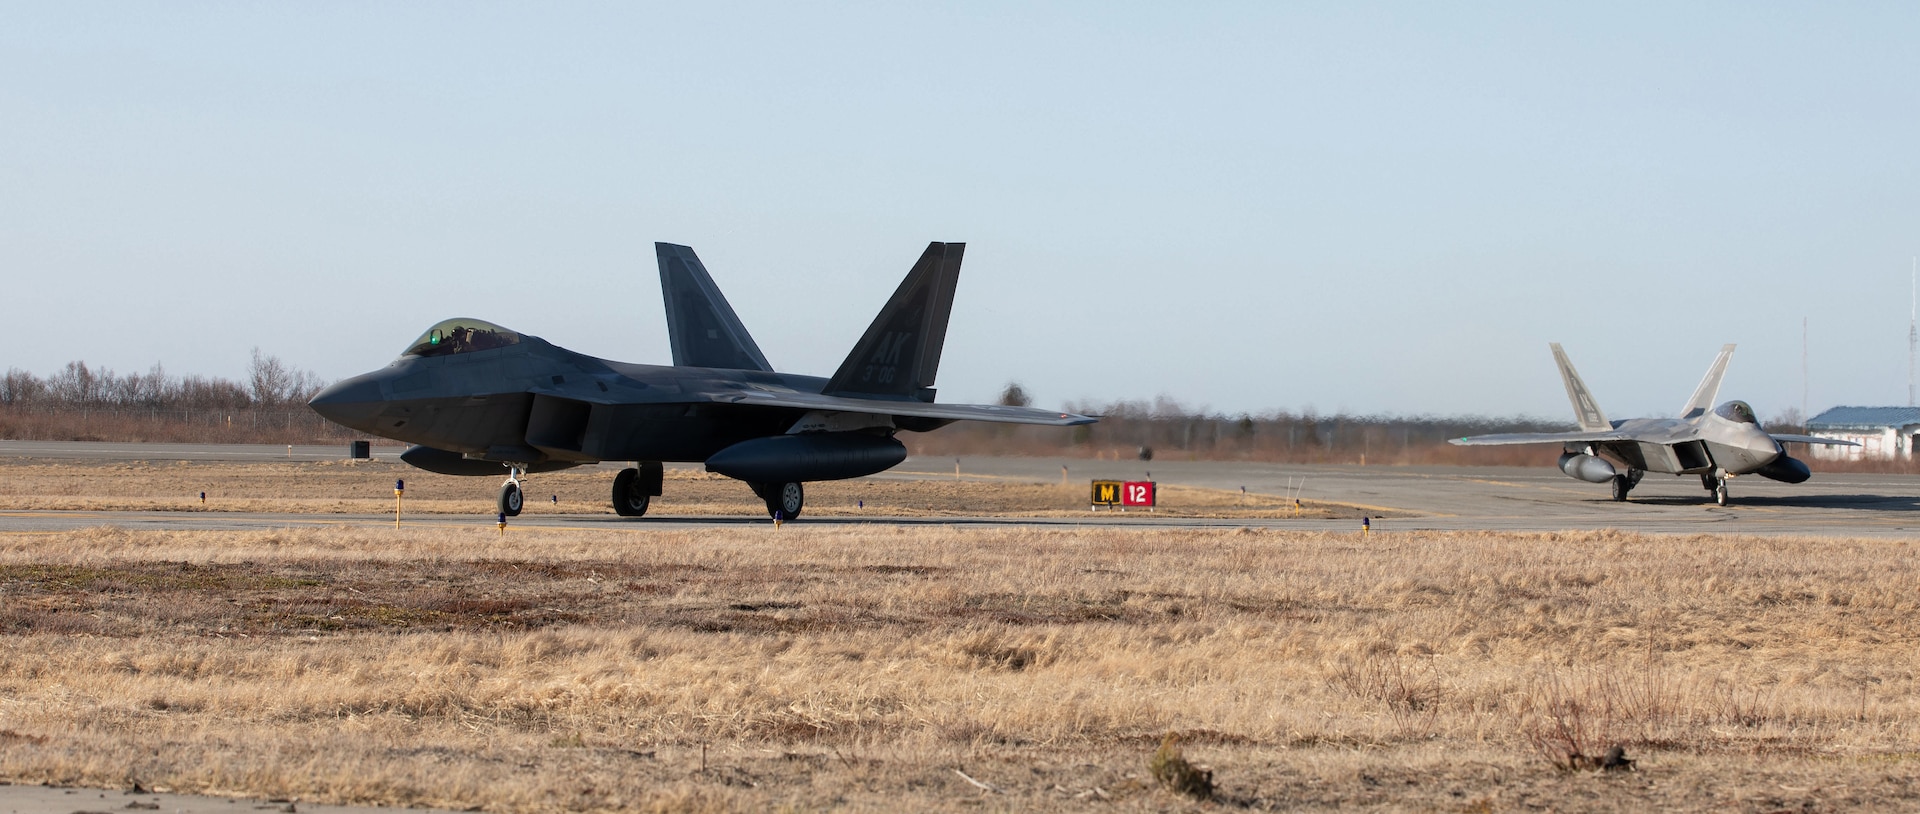 Two F-22 Raptor fighter jets assigned to the 90th Fighter Squadron, 3rd Wing, Joint Base Elmendorf-Richardson, Alaska, taxi in King Salmon, Alaska May 5, 2021 in support of flight operations above the Joint Pacific Alaska Range Complex and Gulf of Alaska during Exercise Northern Edge 2021 (NE21).